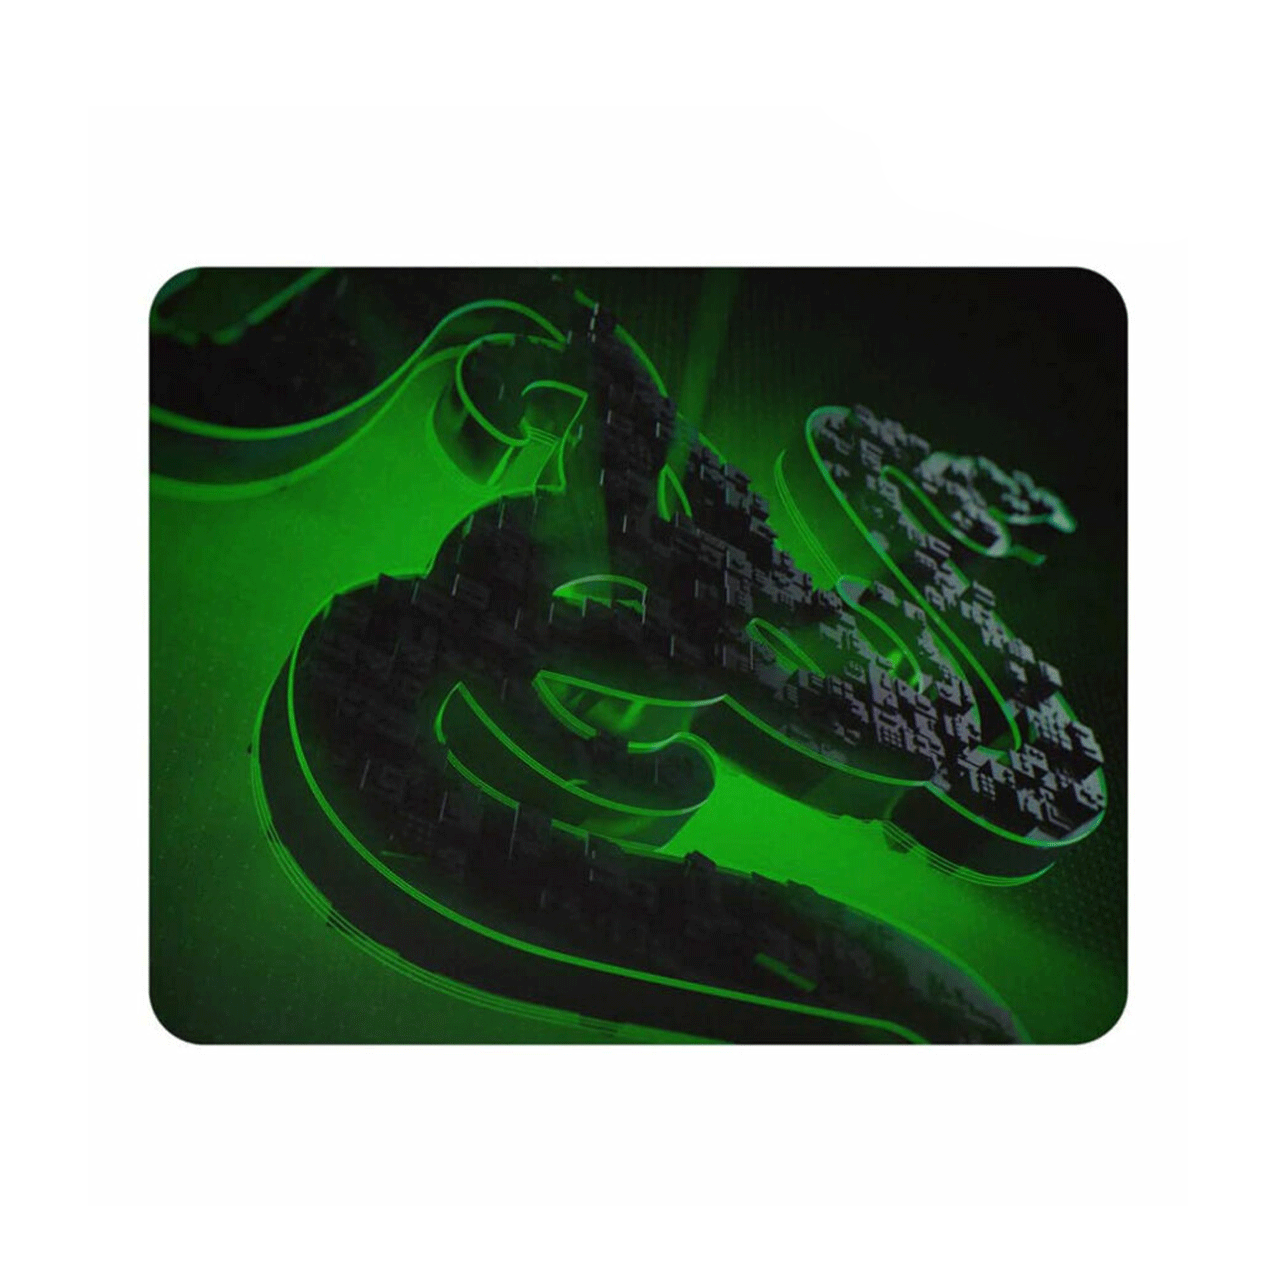 Abyssus-2014-Mouse-and------Goliathus-Mousepad-Bundle